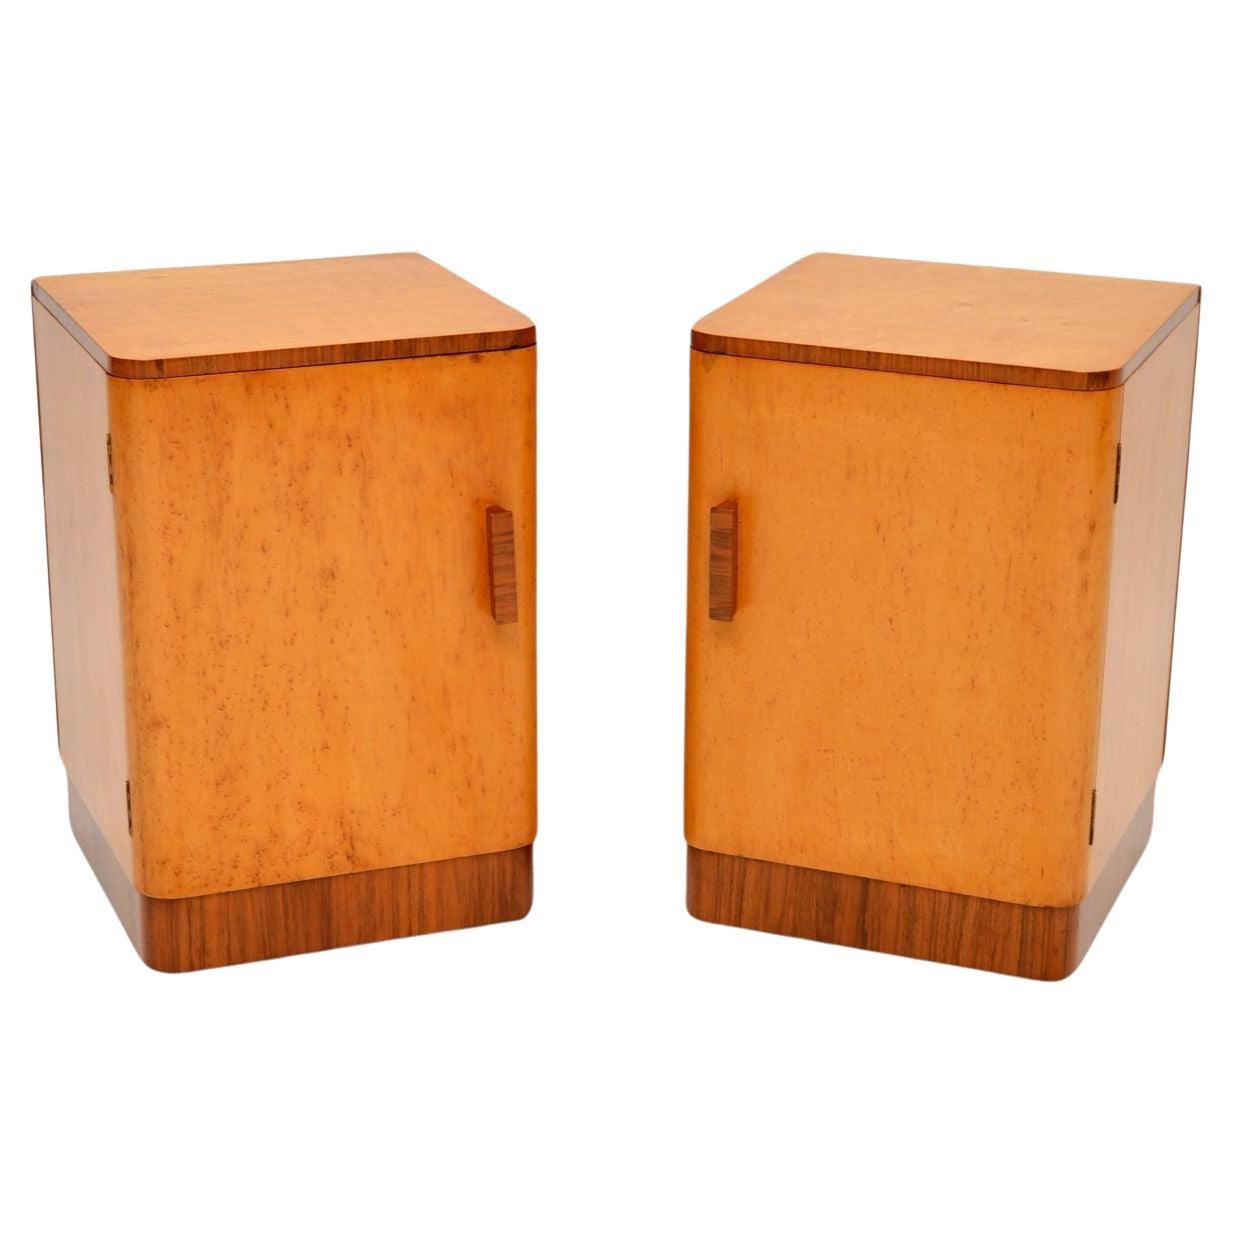 Pair of Art Deco Bedside Cabinets in Birds Eye Maple and Walnut For Sale